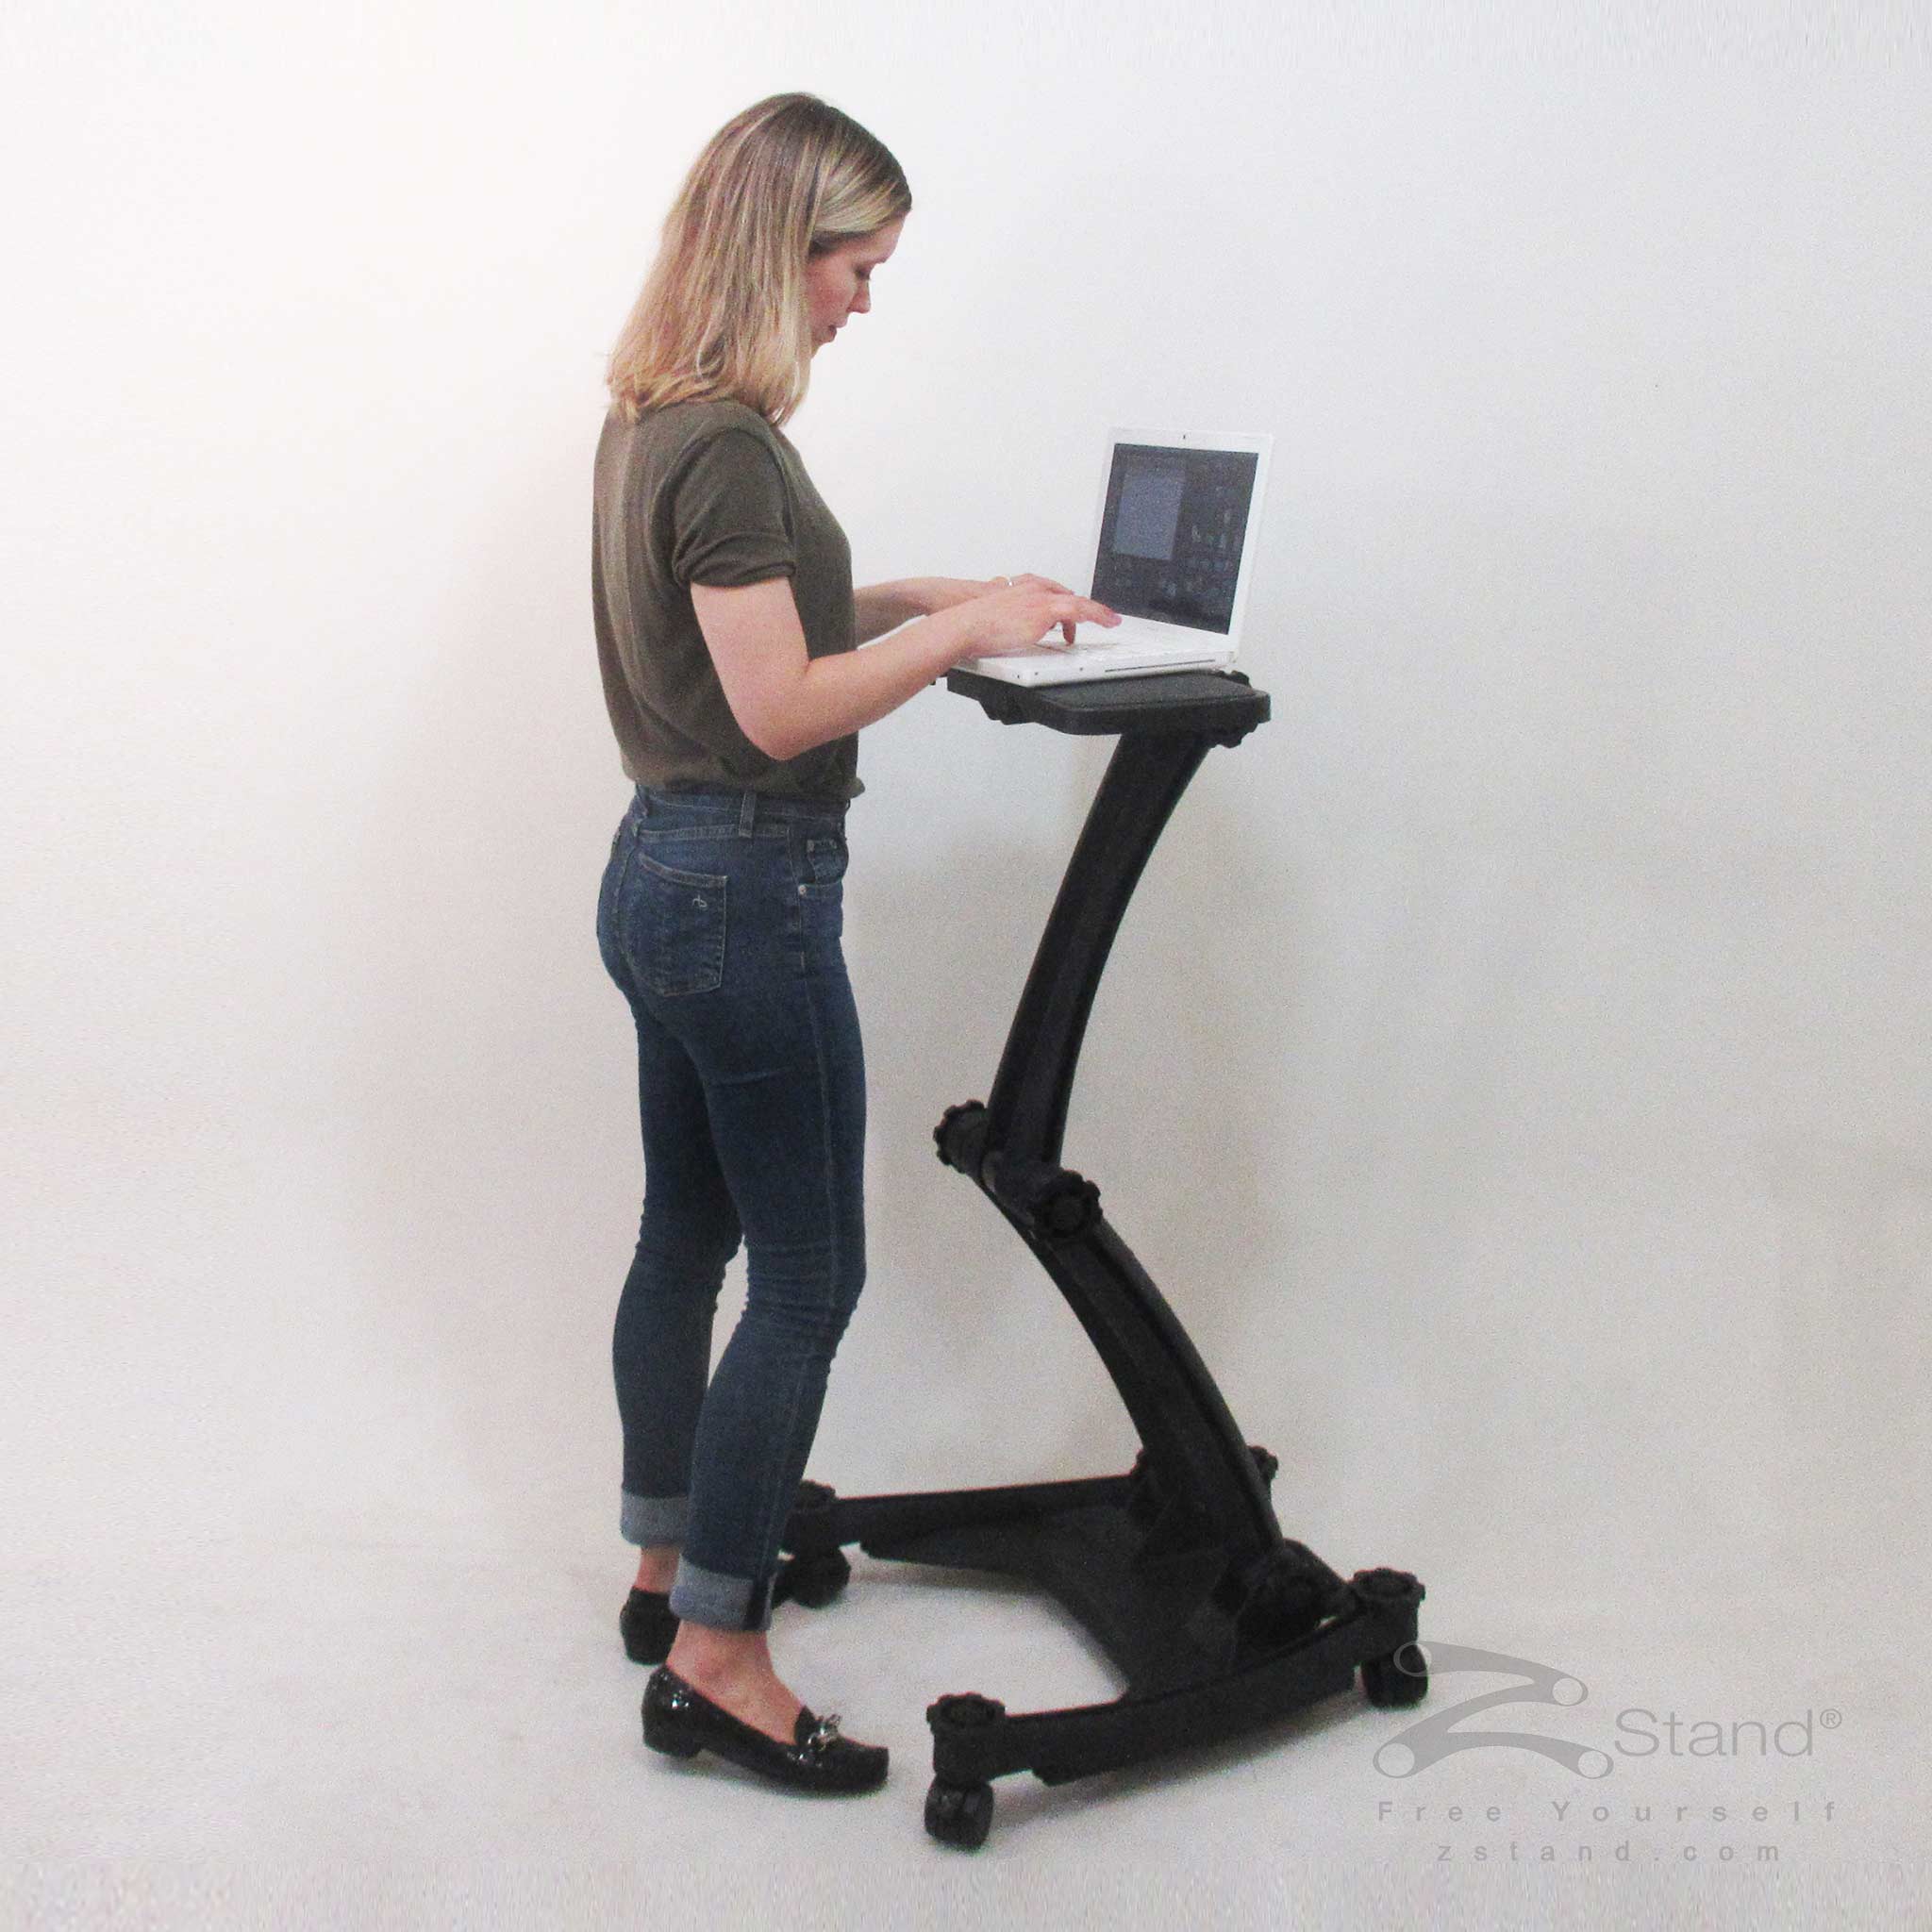 Image of a woman standing and doing work on her laptop thanks to the ZStand Sportster LT portable workstation